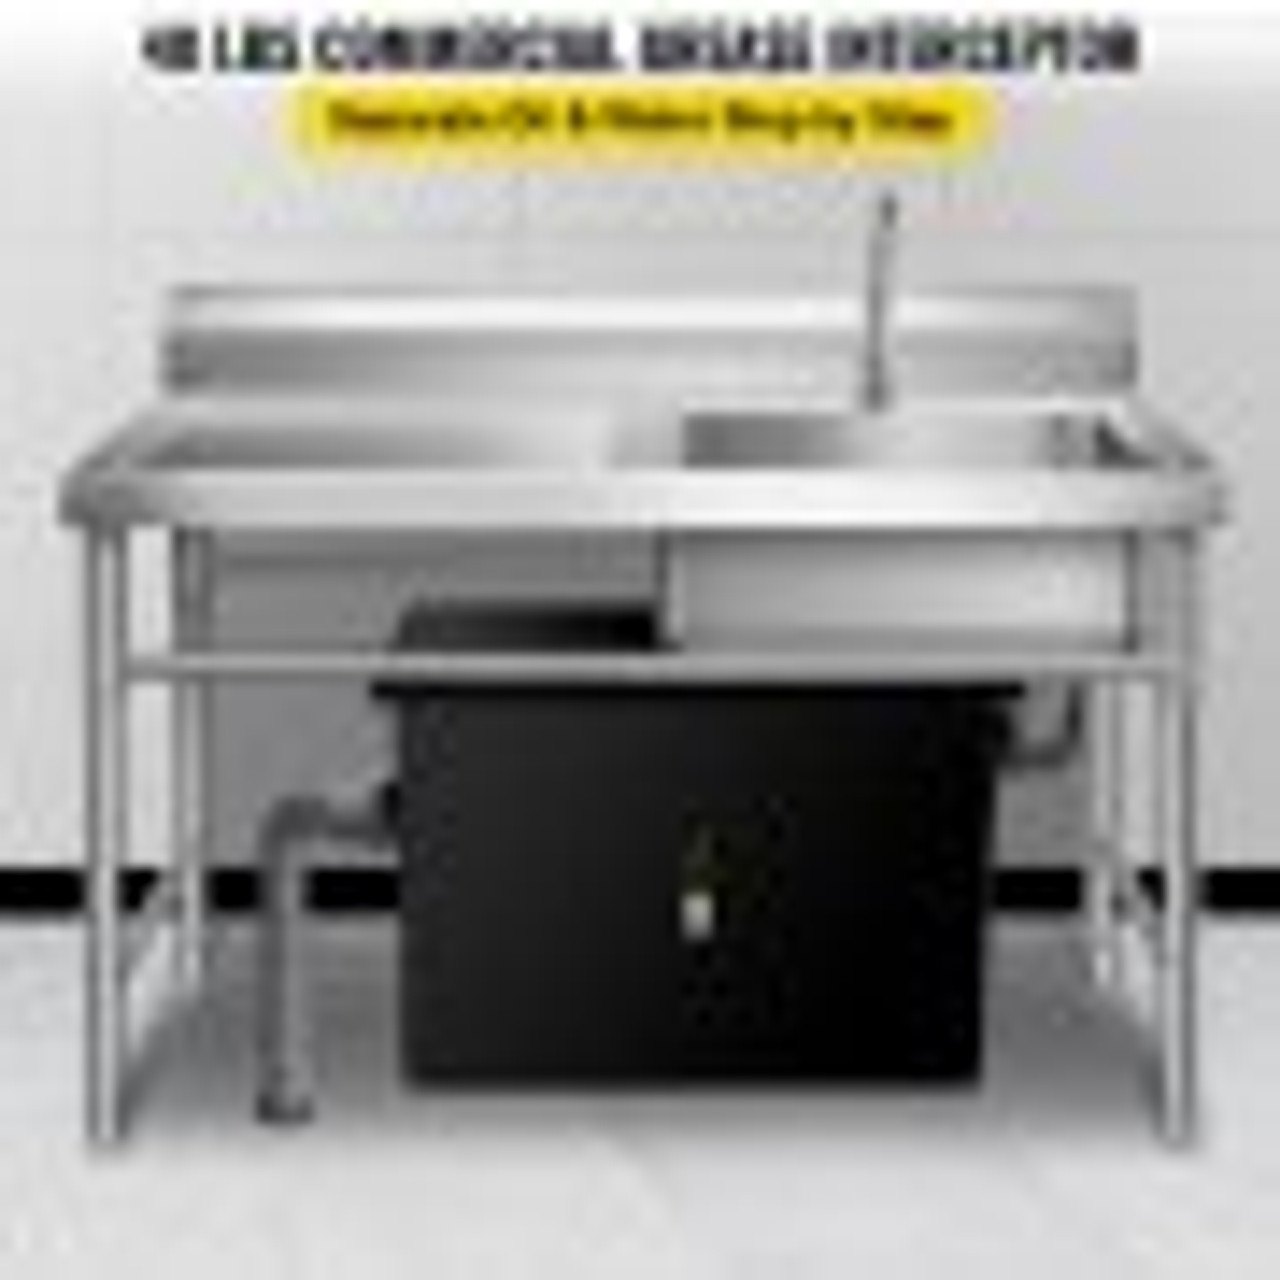 Commercial Grease Interceptor 40 LB, Carbon Steel Grease Trap 20 GPM, Grease Interceptor Trap with Side Water Inlet, Under Sink Grease Trap for Restaurant Canteen Factory Home Kitchen